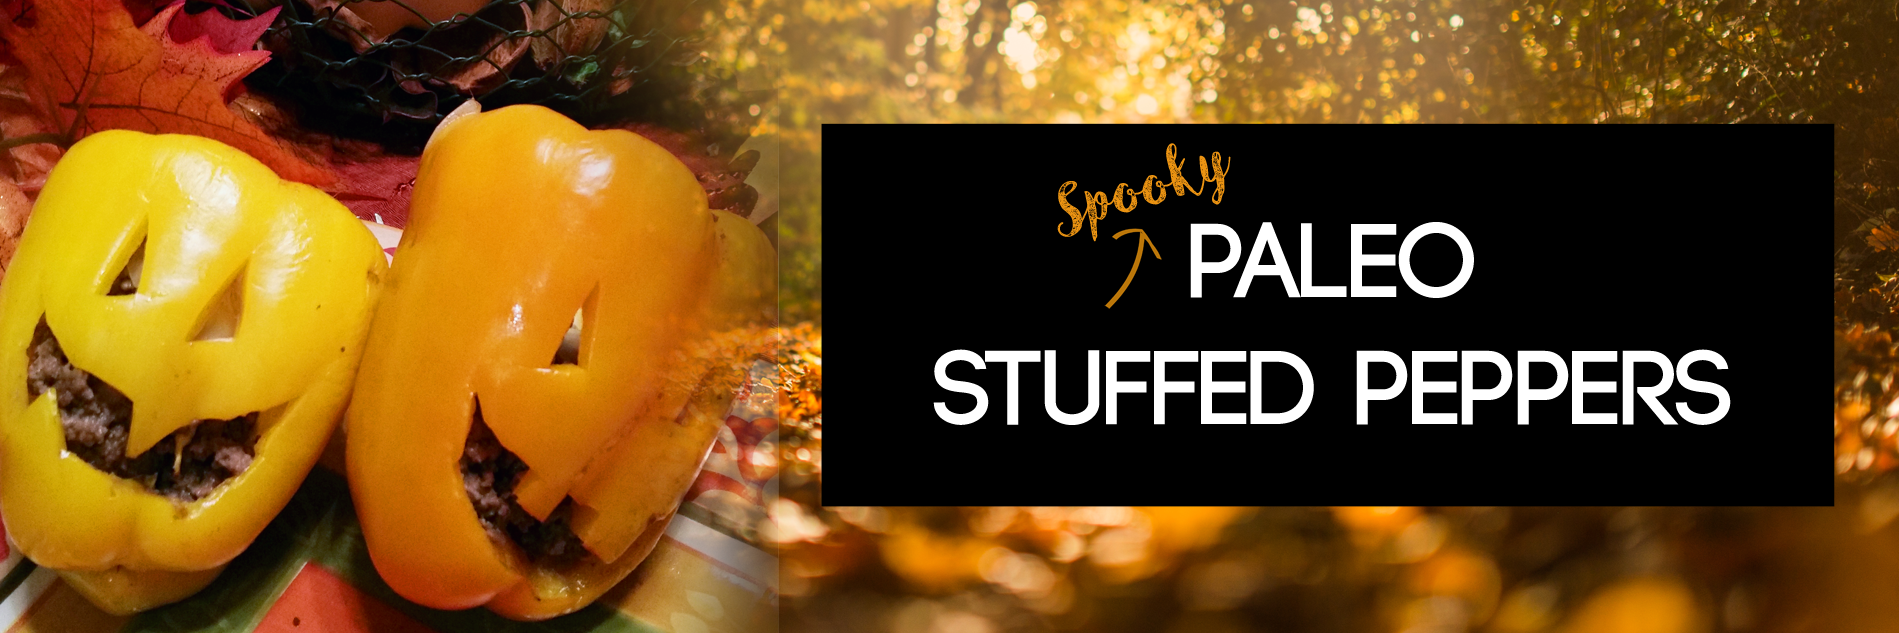 spooky stuffed peppers banner - small